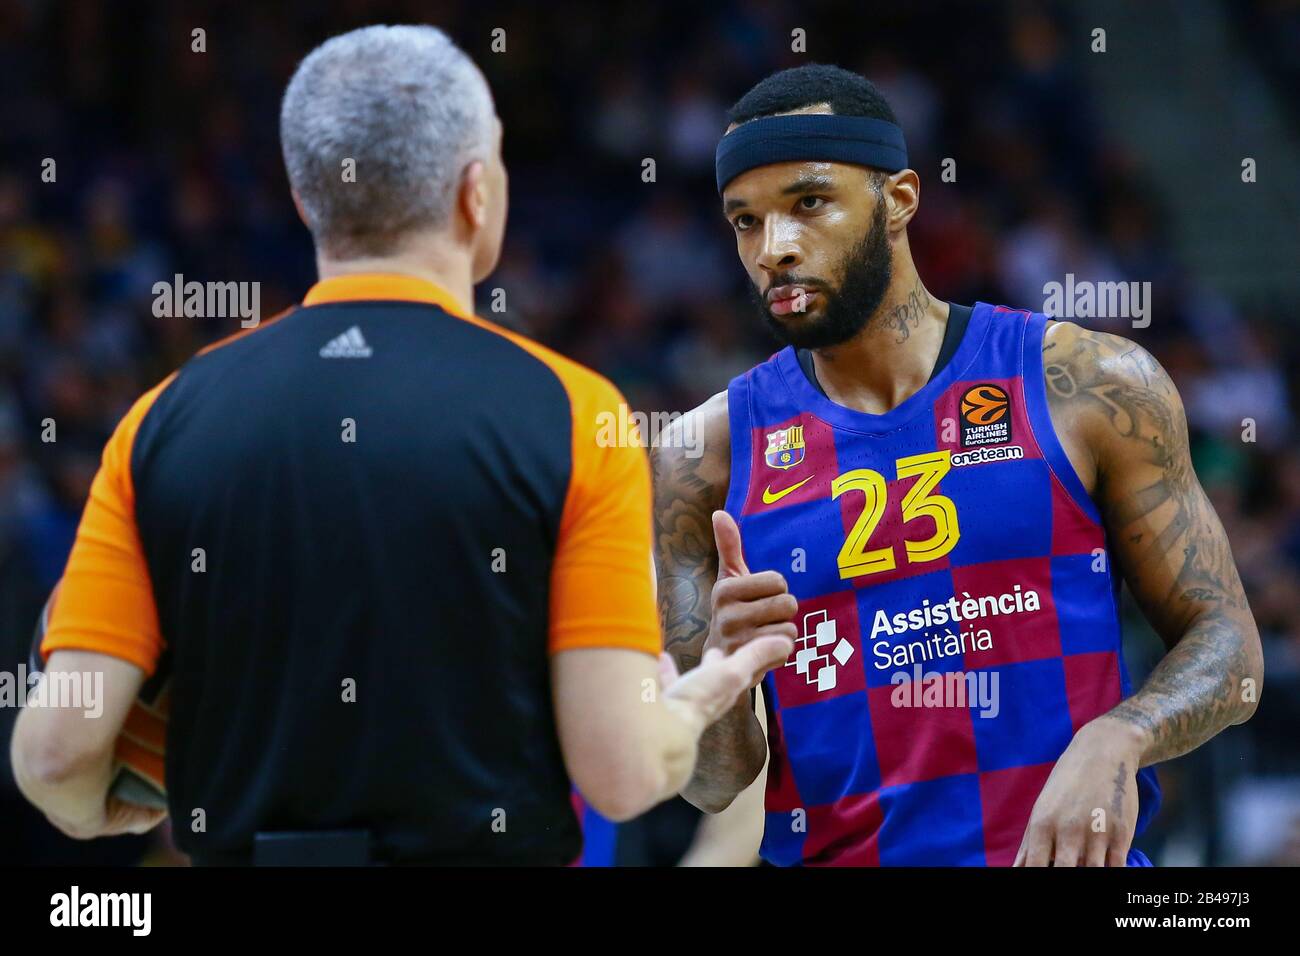 Berlin, Germany, March 04, 2020:Basketball player Malcolm Delaney of FC Barcelona during the EuroLeague basketball match Stock Photo